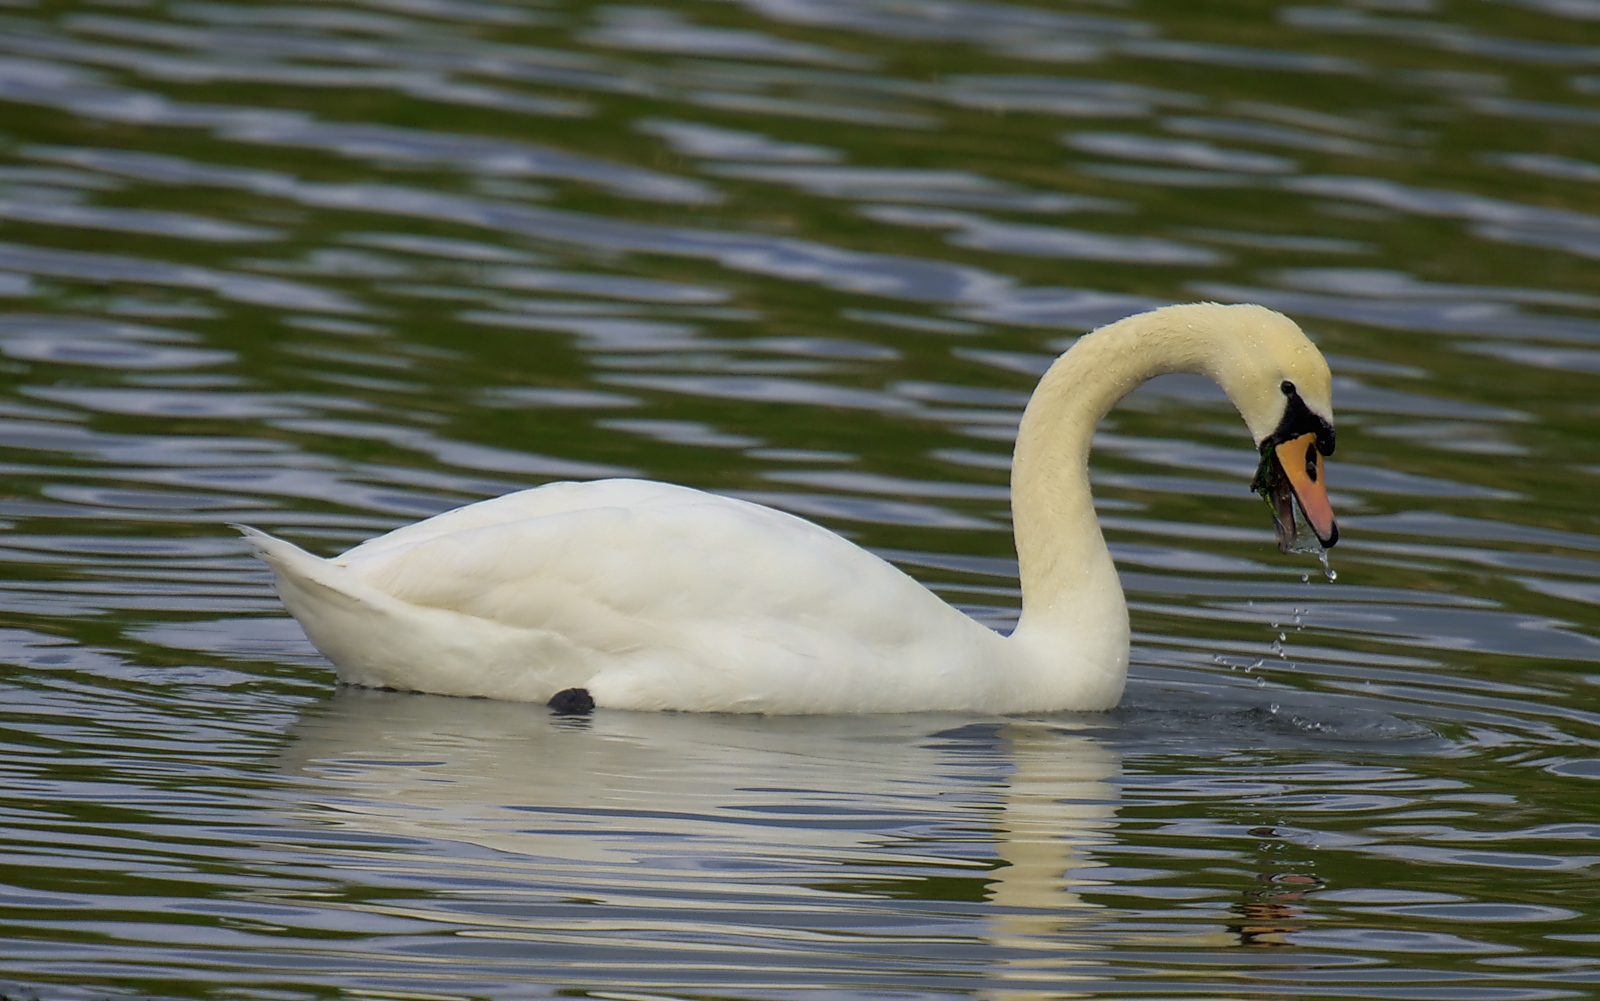 a swan is swimming in the water with his beak extended